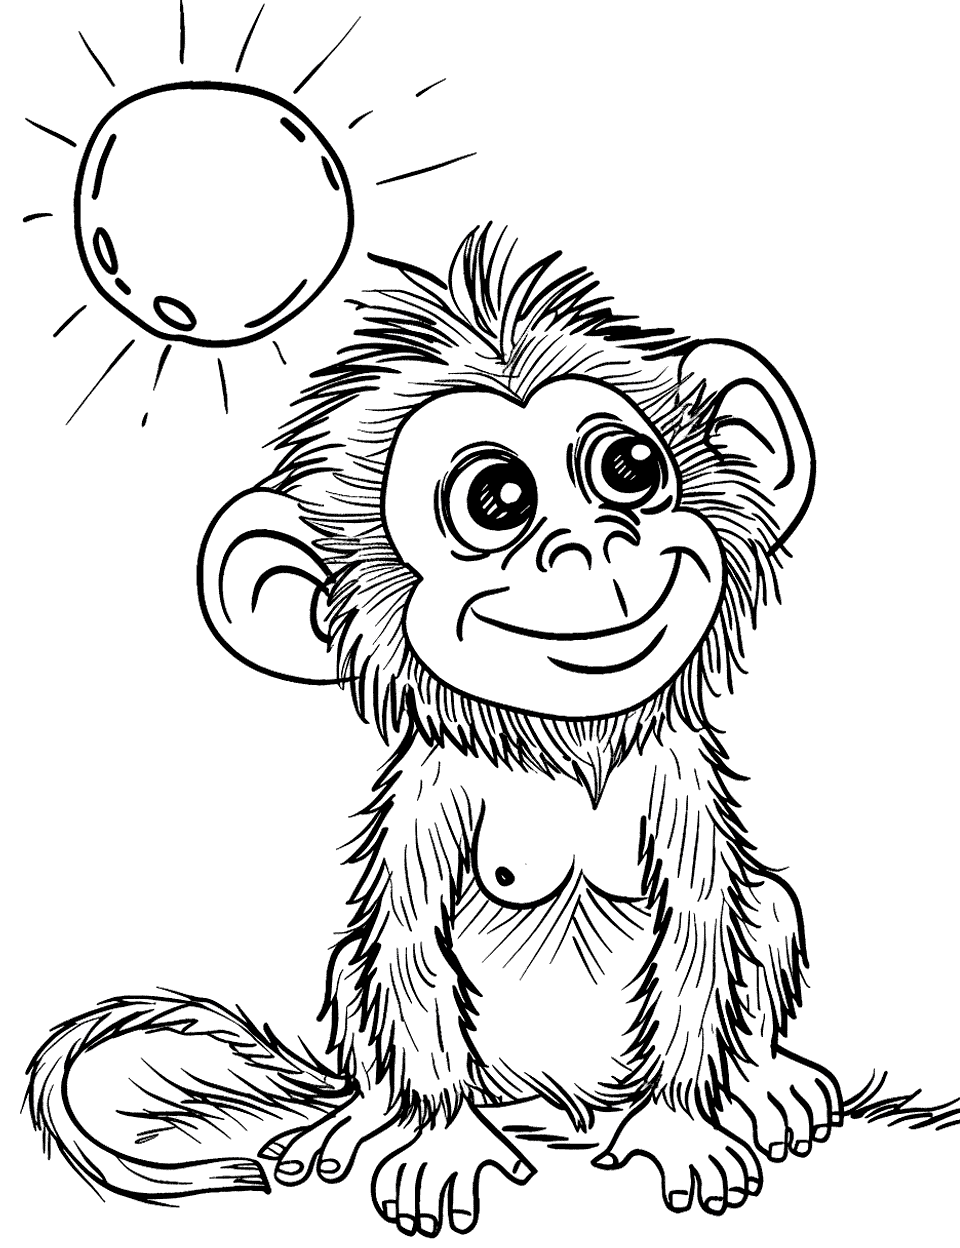 Monkey on a Sunny Day Coloring Page - A monkey with a happy expression, basking in the sun on a warm day.